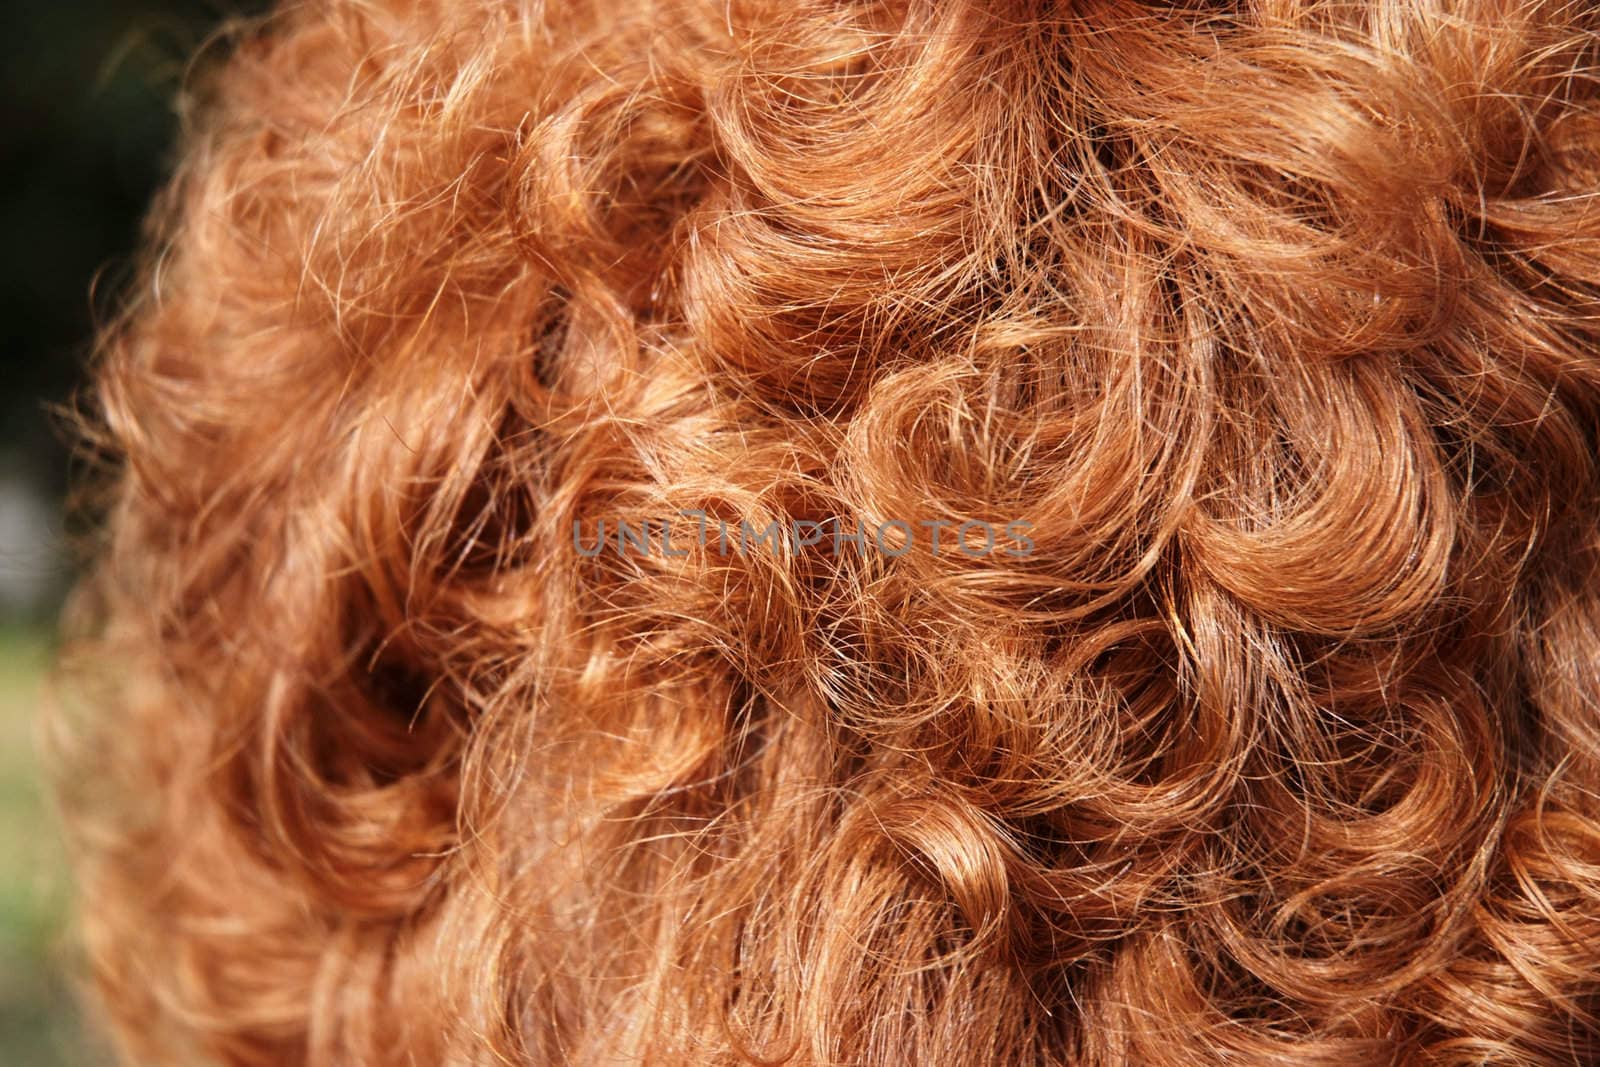 Curley red hair of a woman